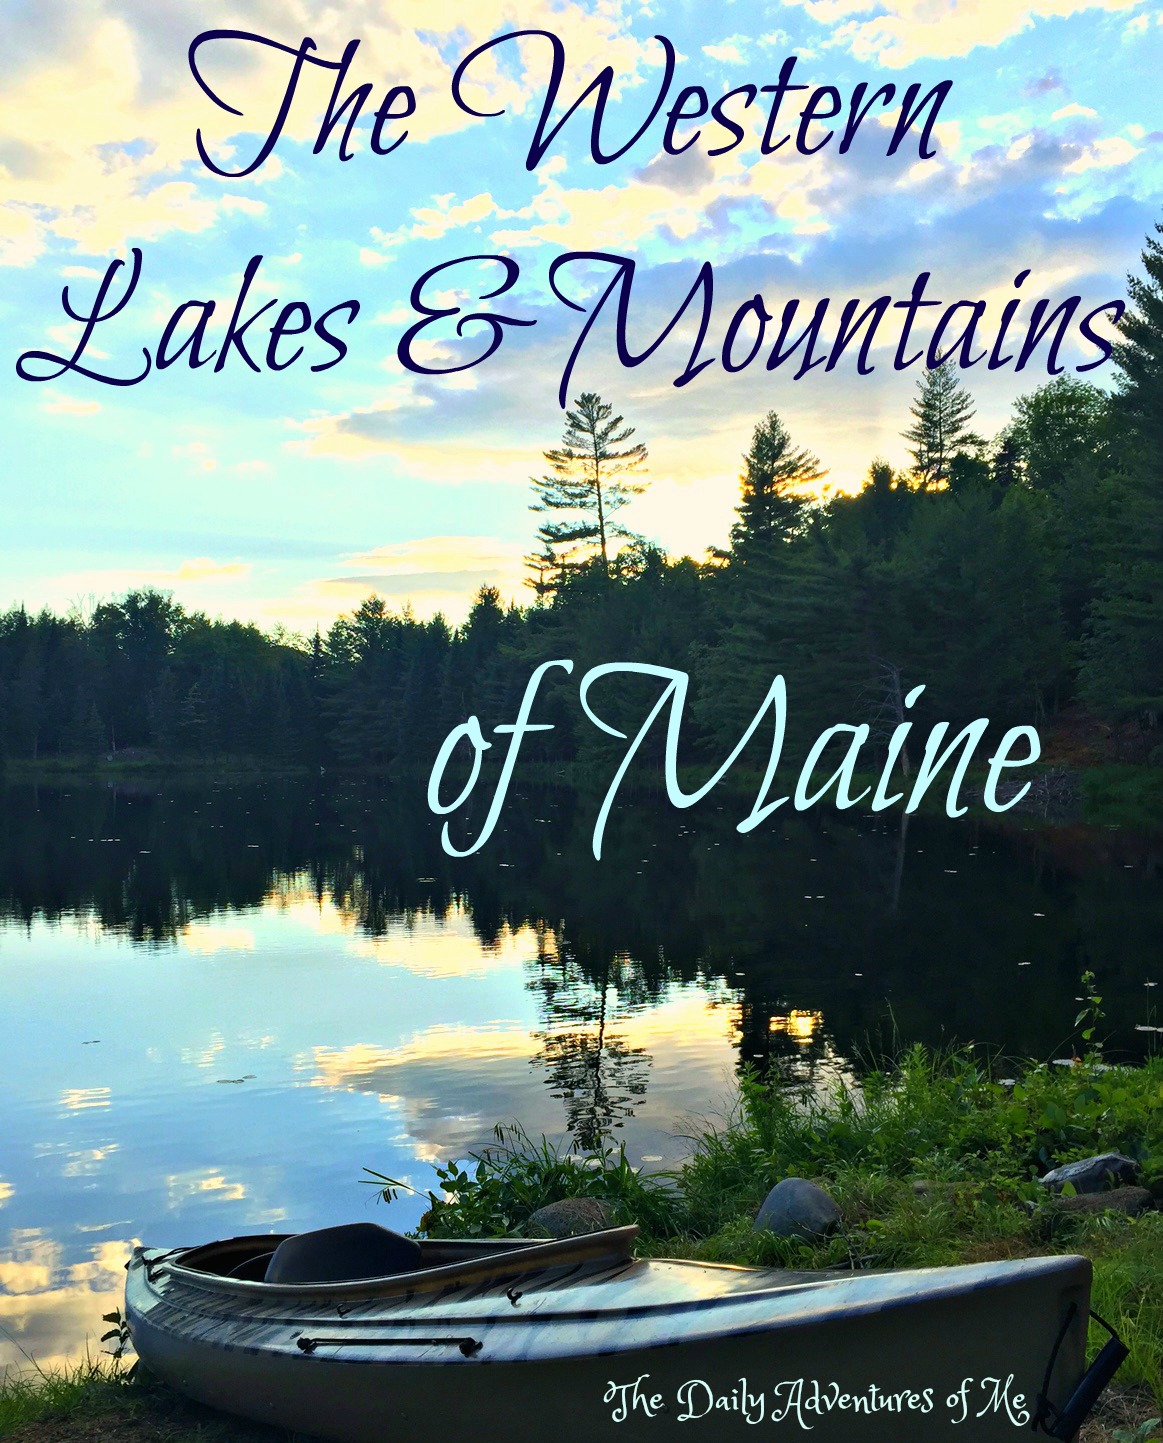 Ten Things I Love to do in the Western Mountains of Maine www.thedailyadventuresofme.com